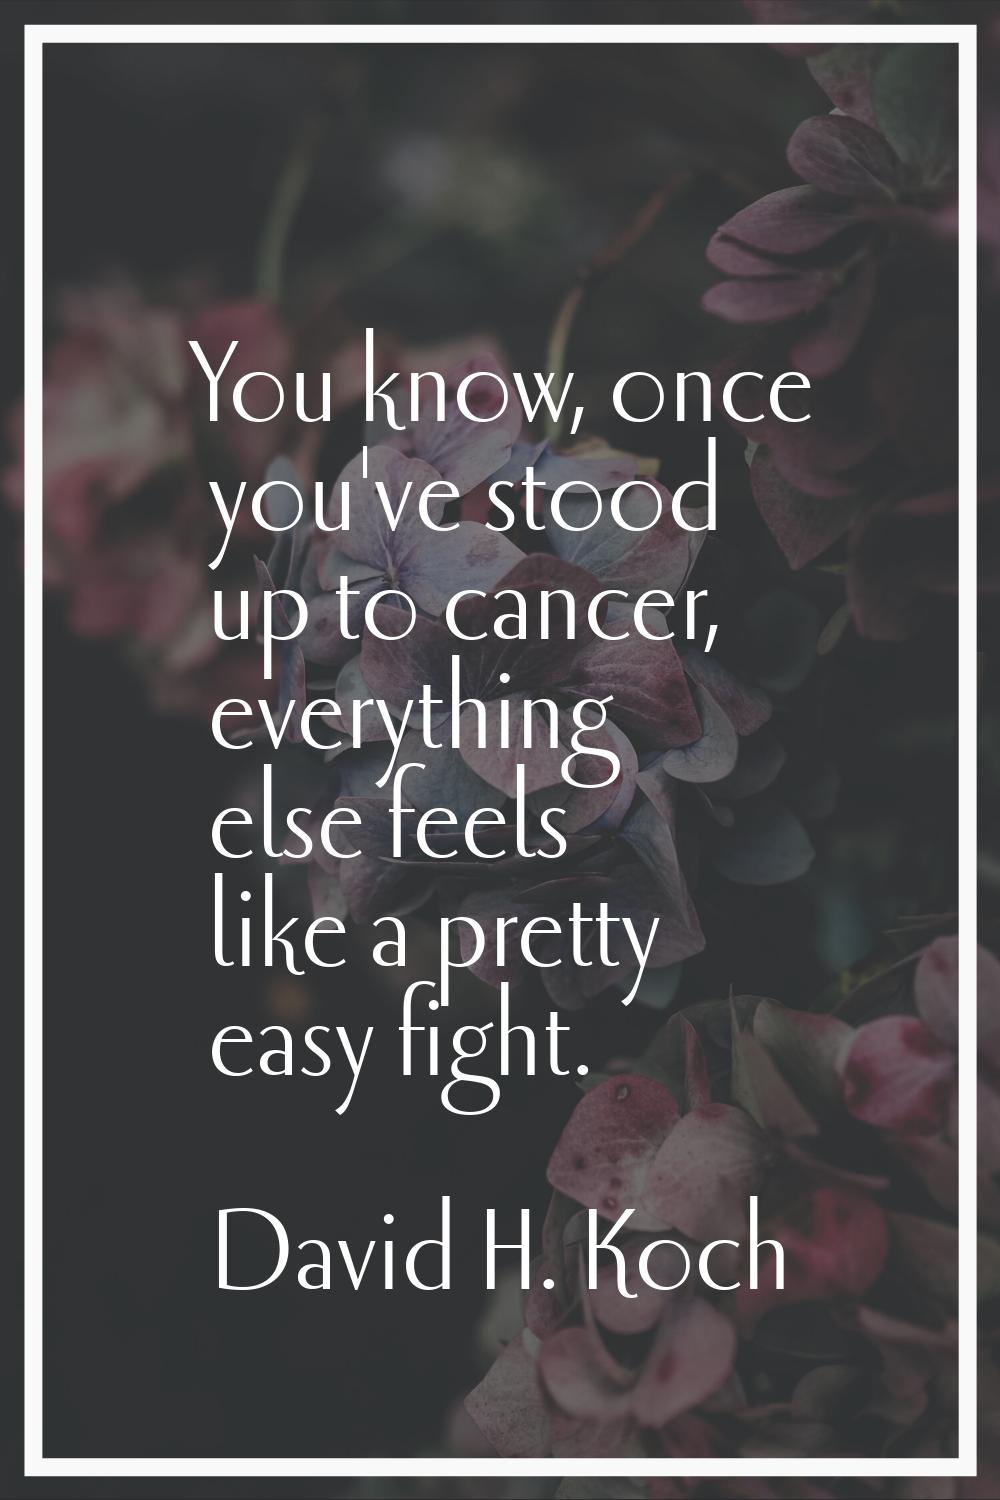 You know, once you've stood up to cancer, everything else feels like a pretty easy fight.